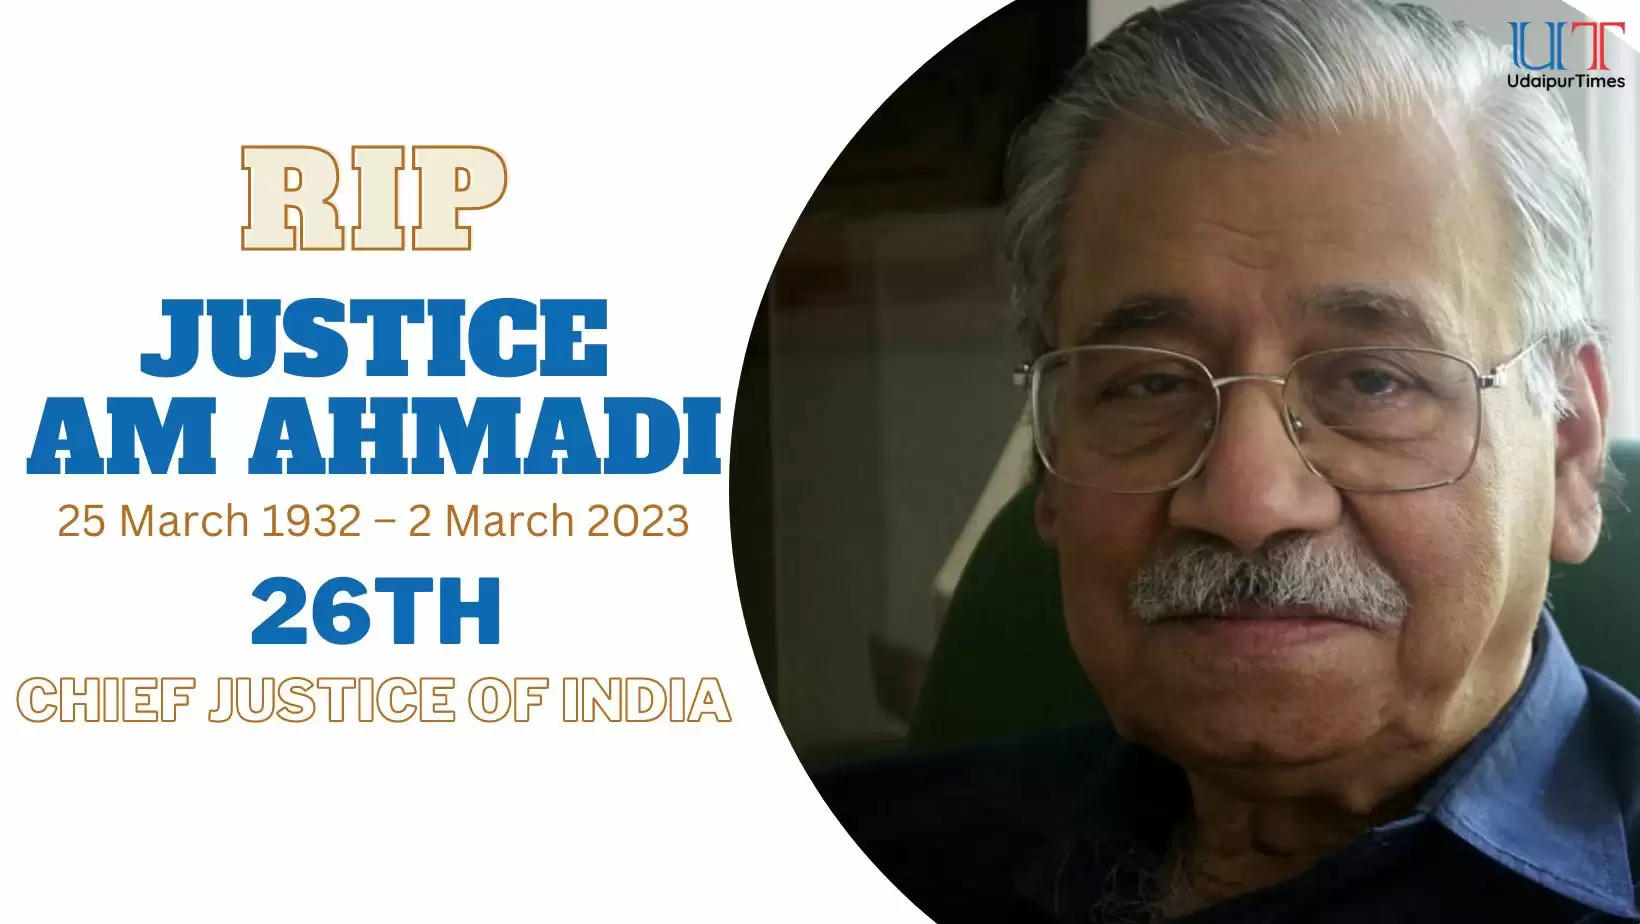 Justice AM Ahmadi 26th Former Chief Justice of India passes away at the age of 91